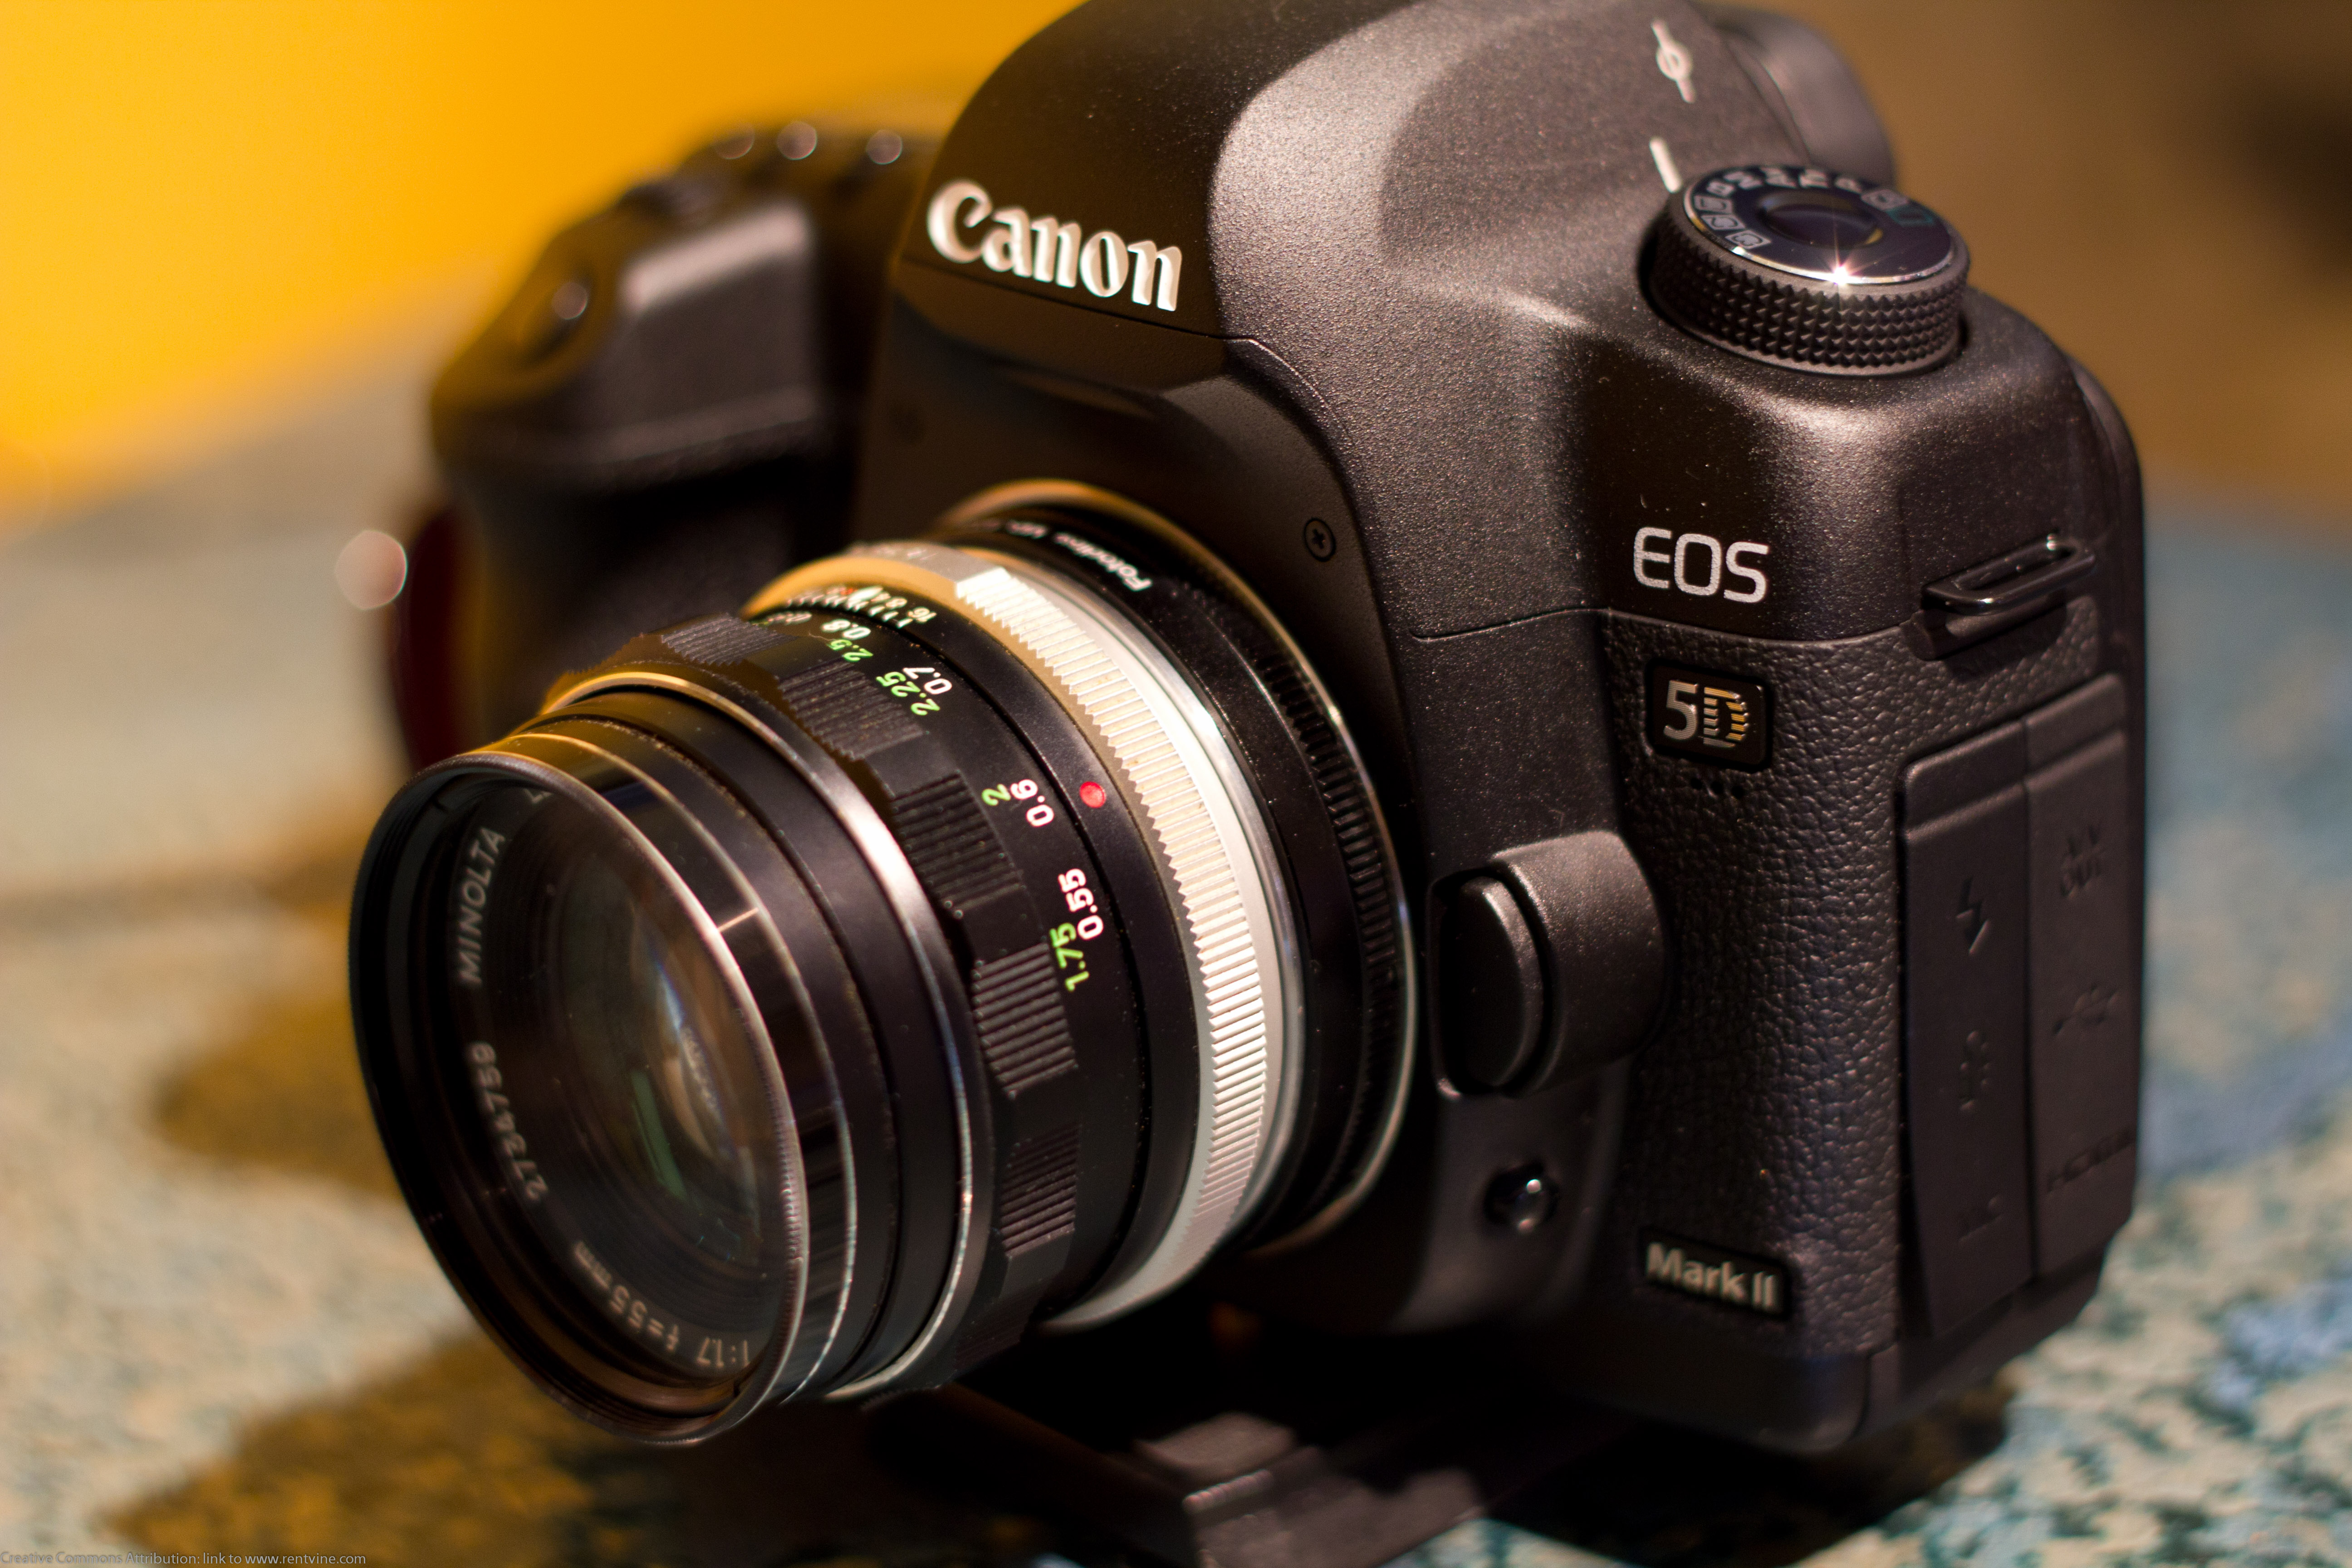 File:Canon EOS 5D Mark II with Old Lens.jpg - Wikimedia Commons